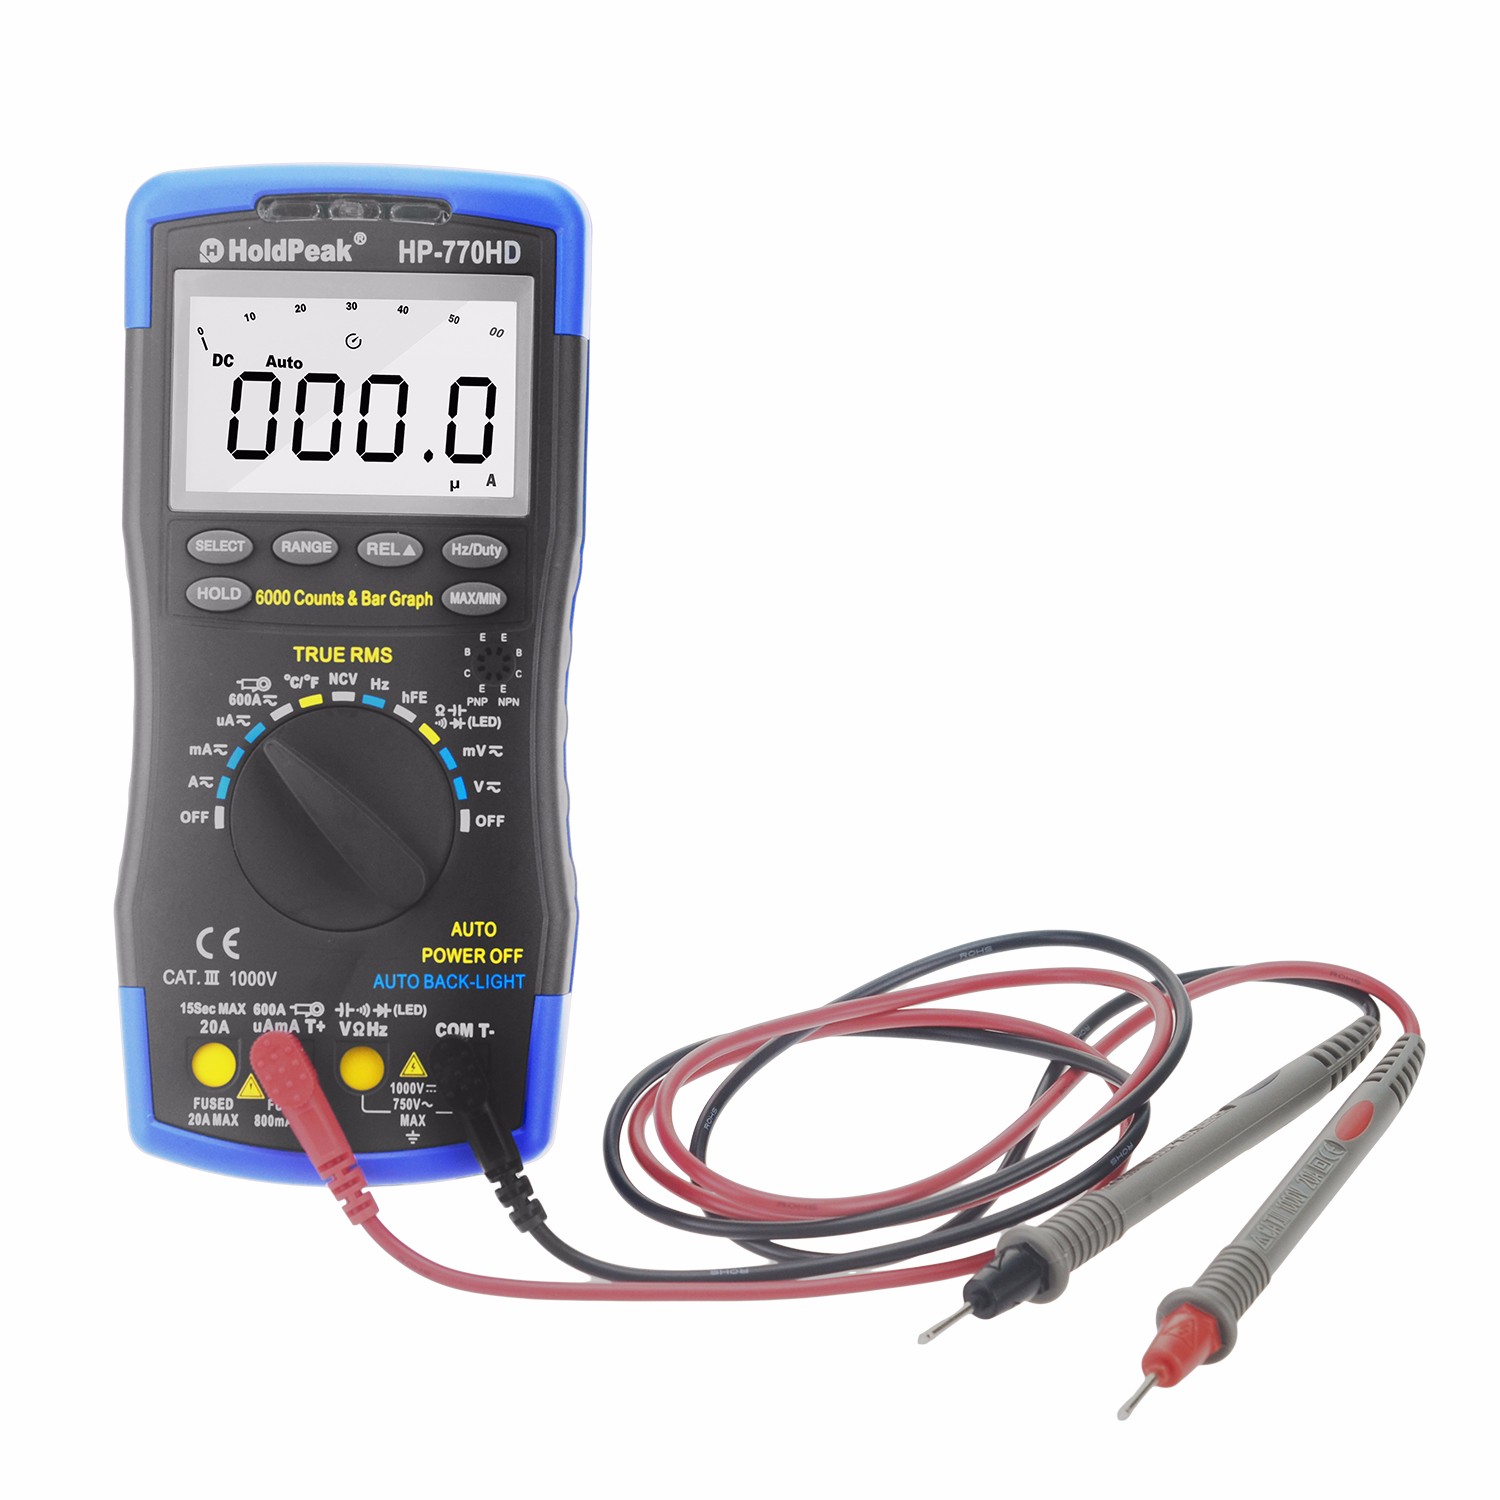 HoldPeak High-quality ac multimeter for business for electrical